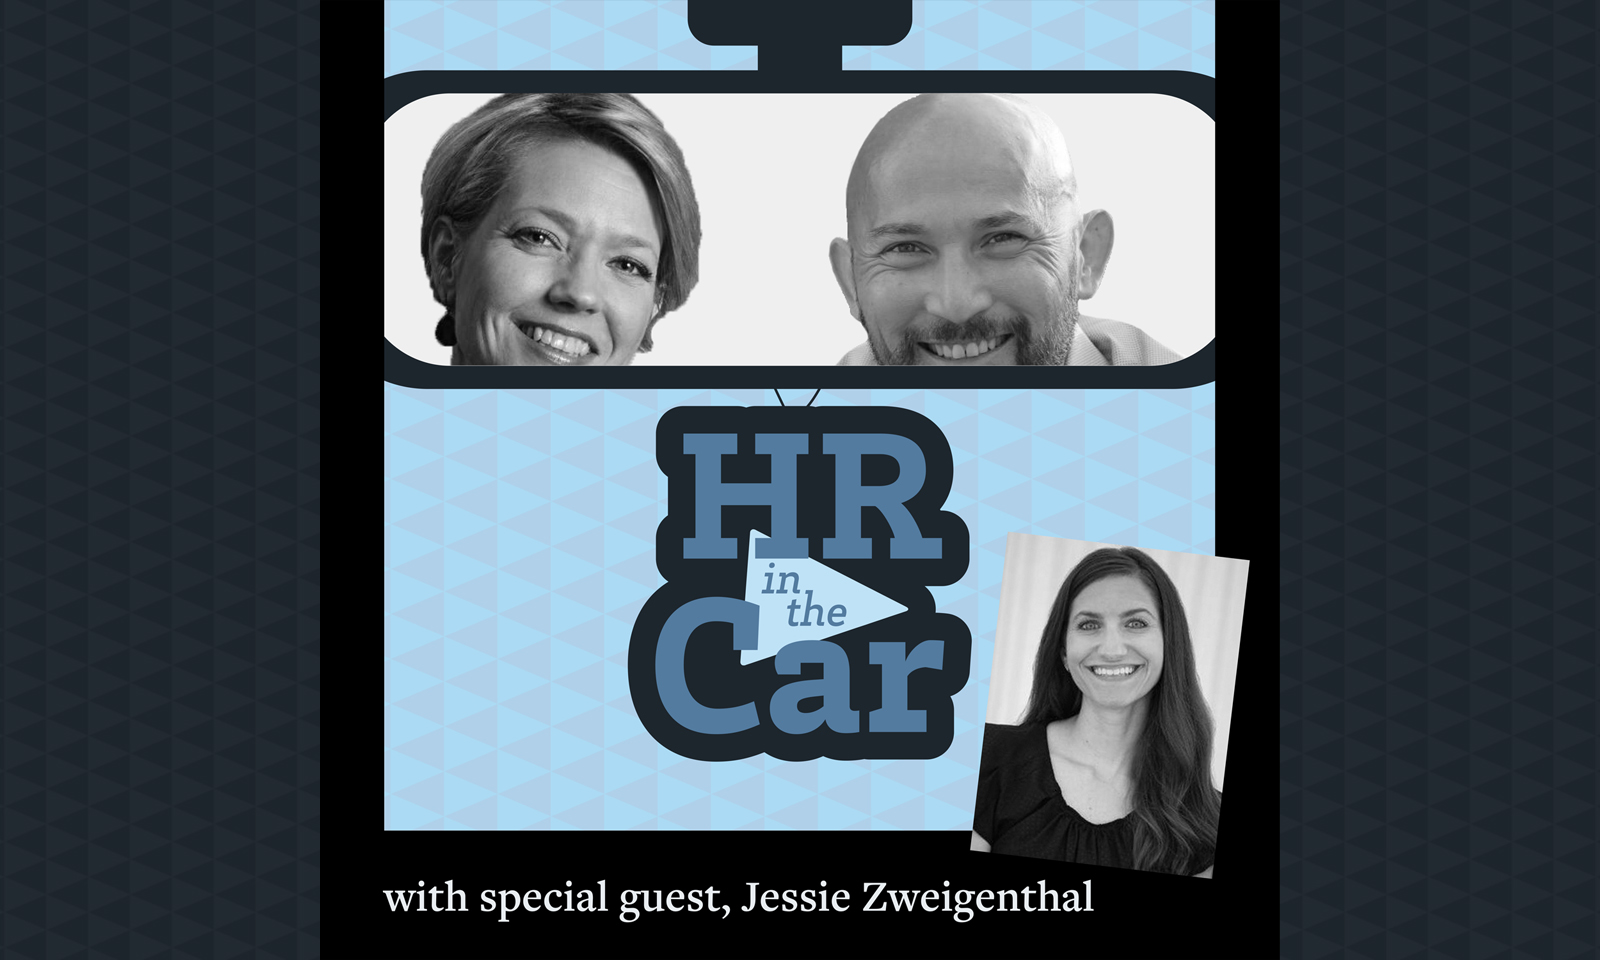 HR in the Car - Episode 15: "Help the Person Right in Front of You"